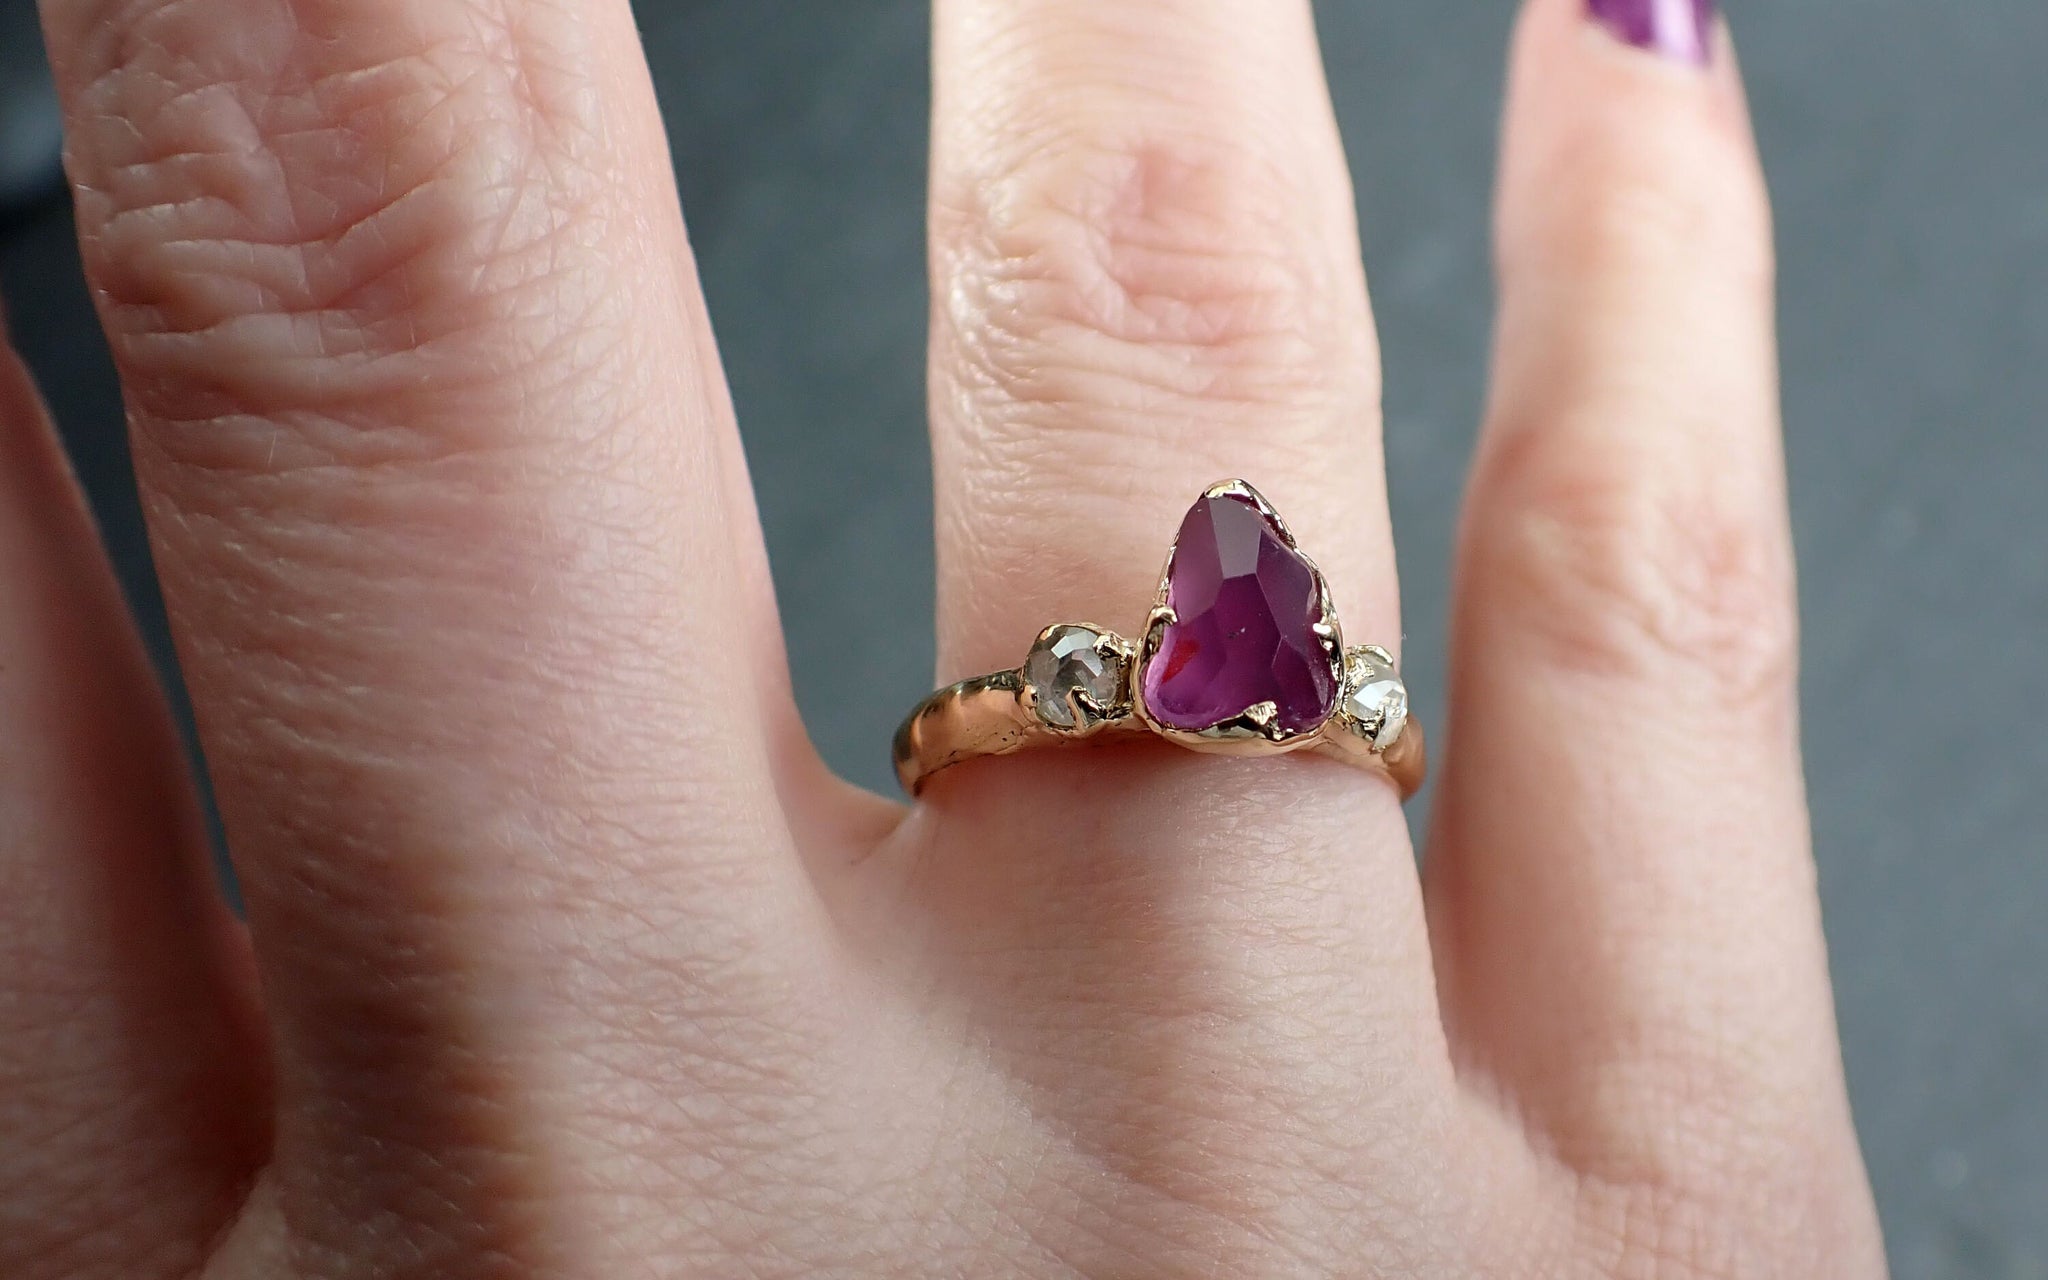 Partially faceted Pink Sapphire and fancy Diamonds 18k Yellow Gold Engagement Wedding Gemstone Multi stone Ring 2906